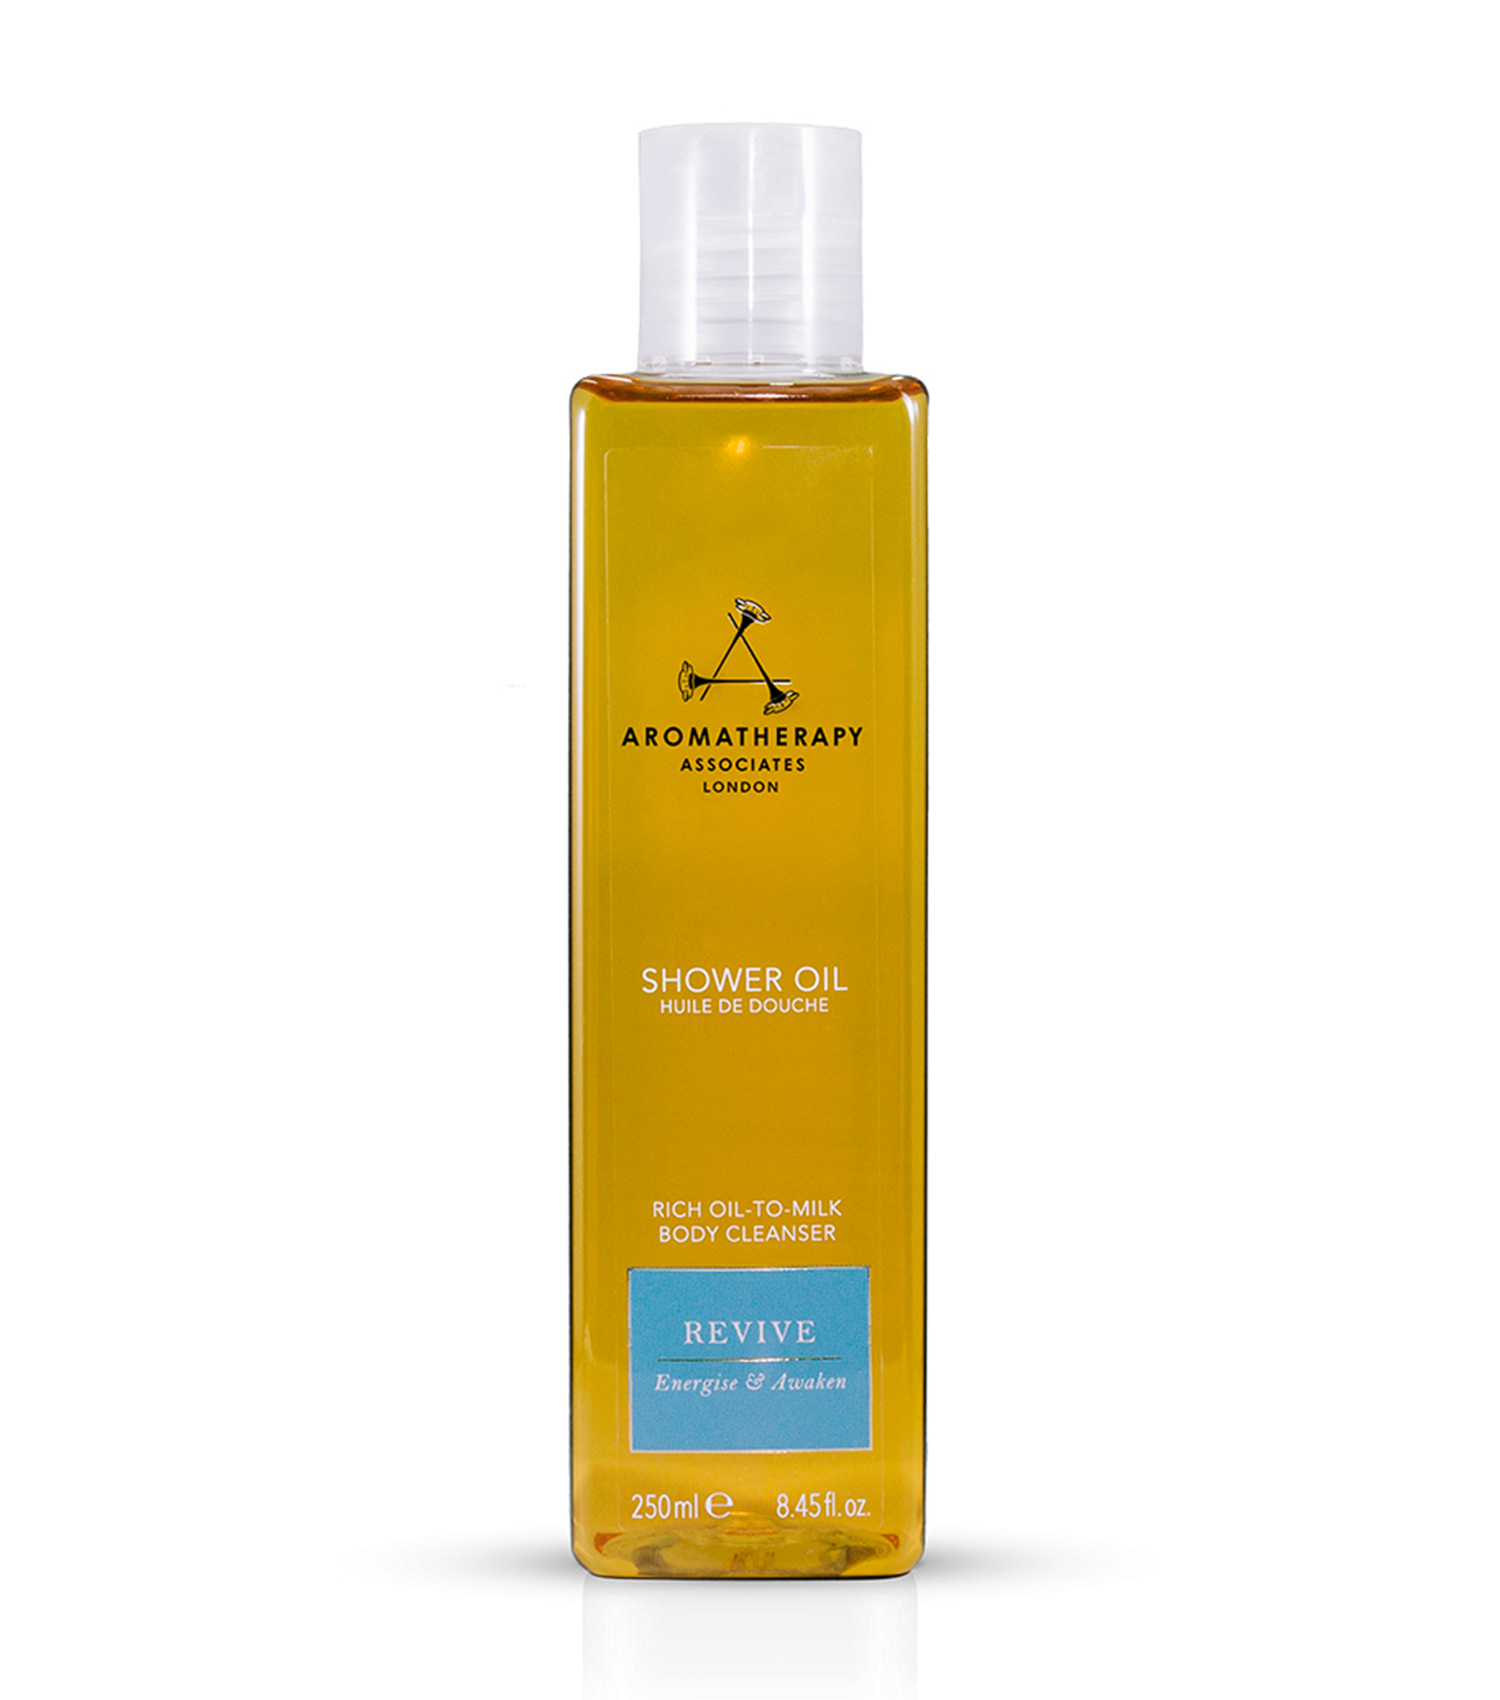 Revive Cleansing Shower Oil Revive Cleansing Shower Oil 1